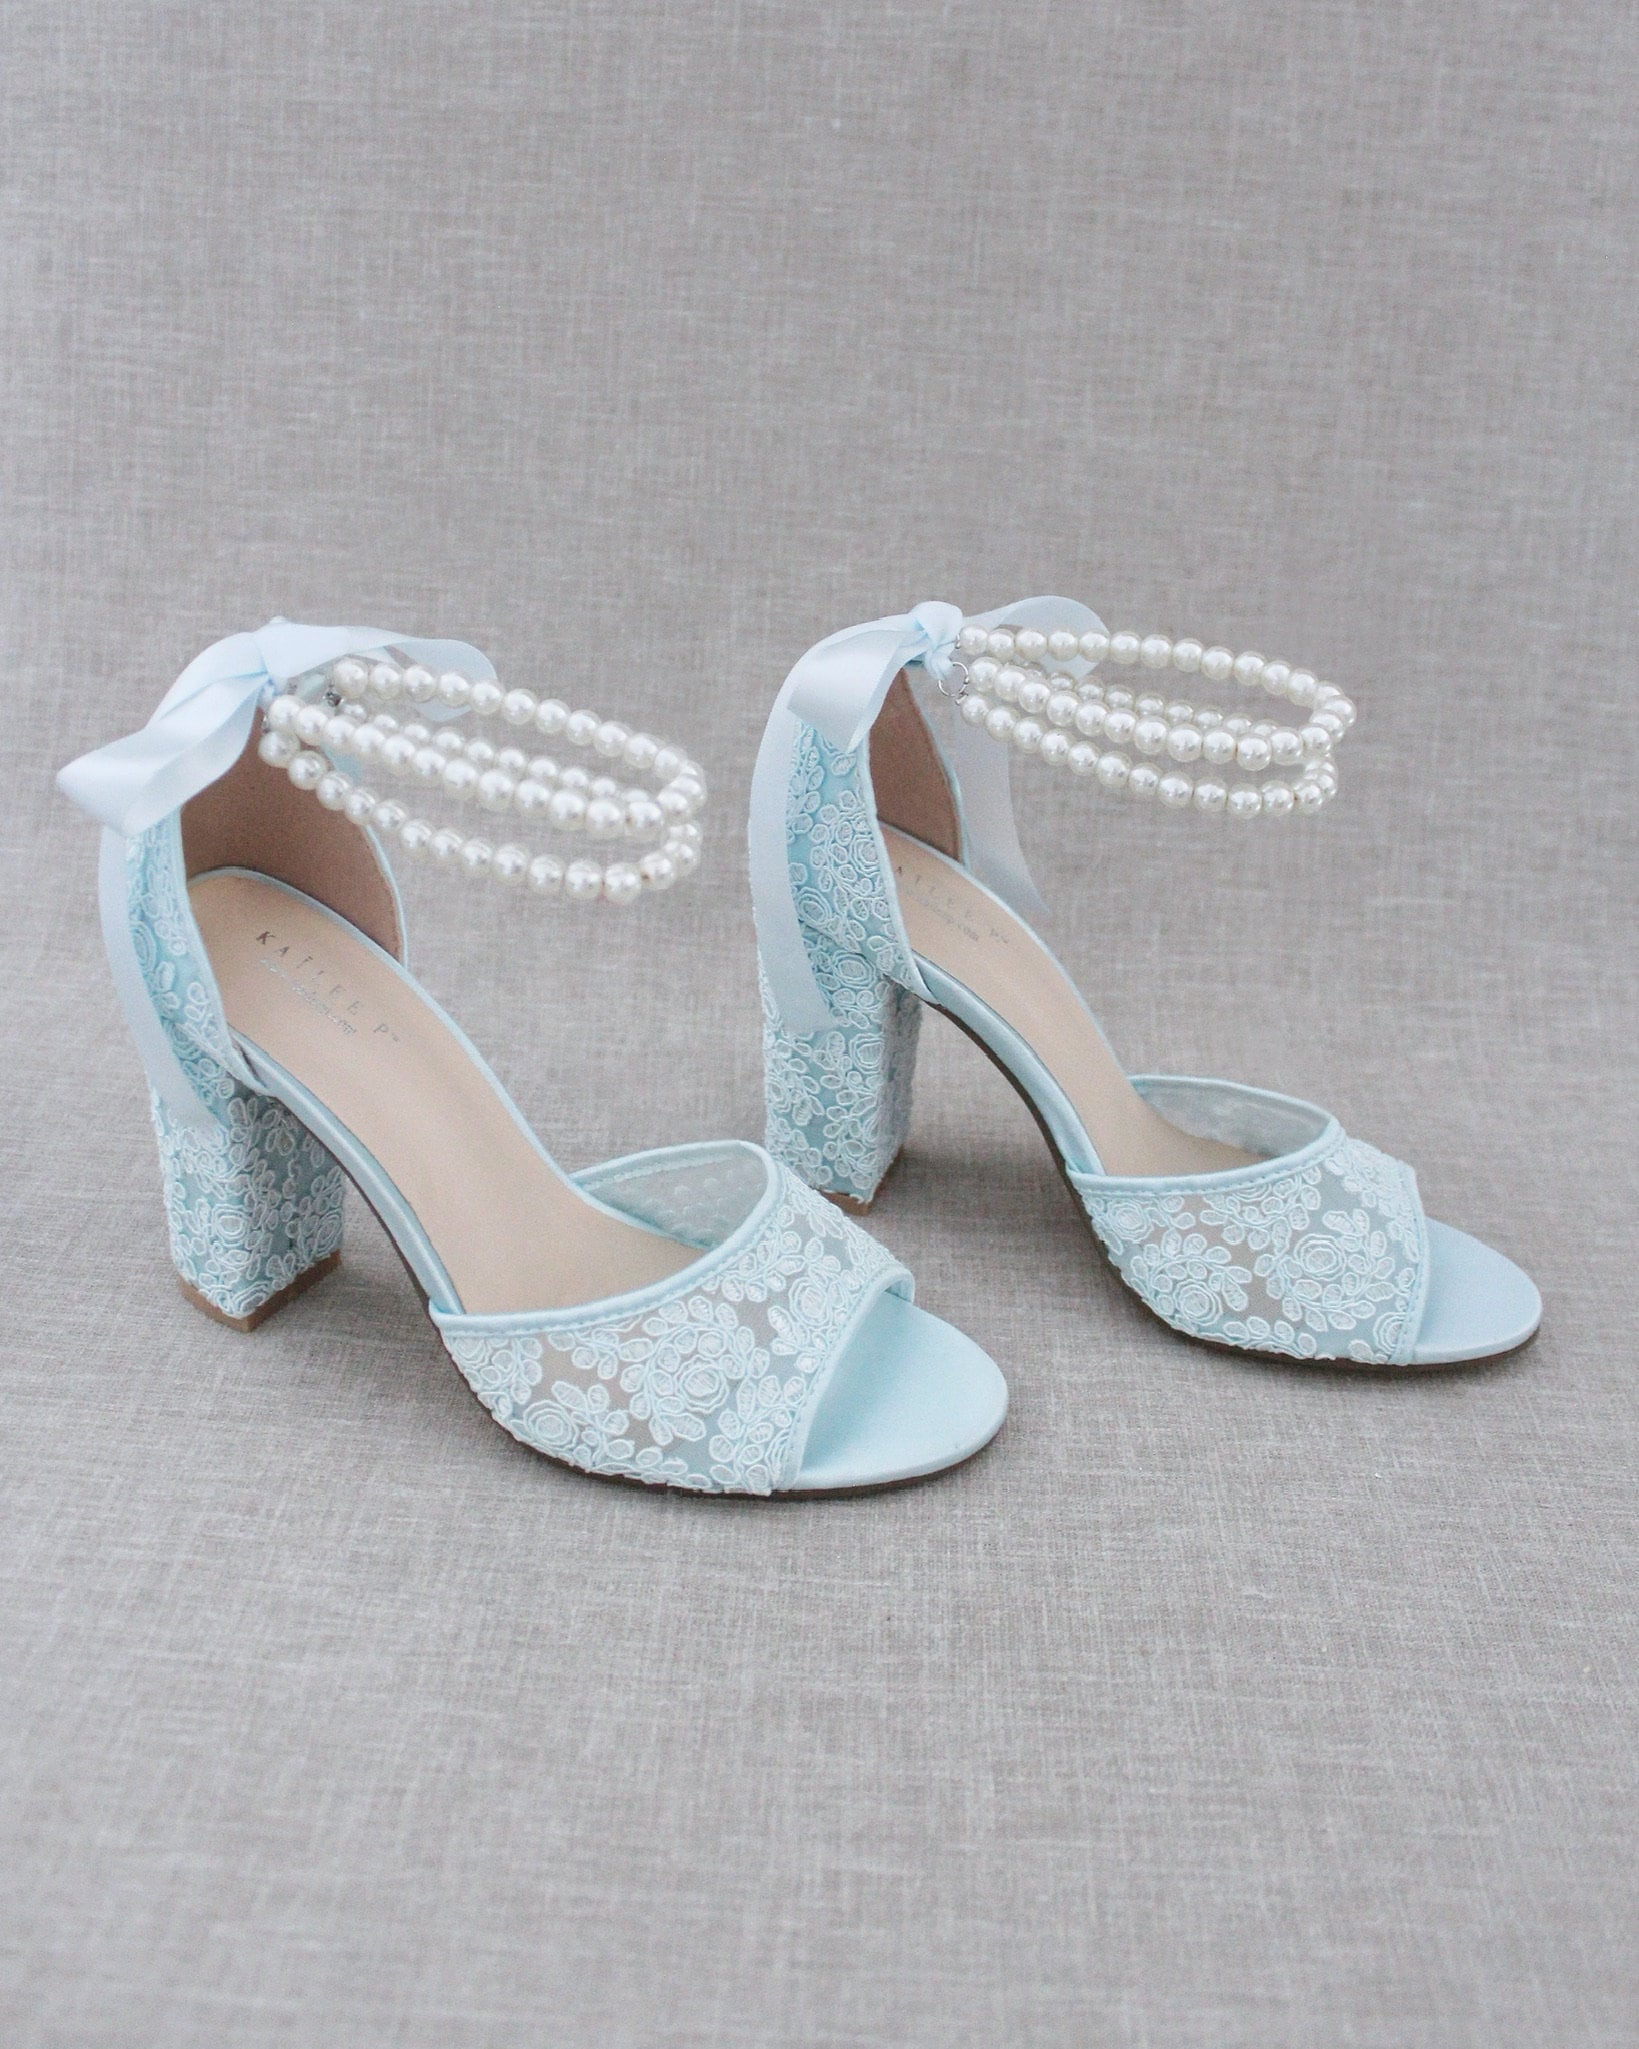 Buy BLUE BRIDAL SHOES, Suede Bridal Shoes, Baby Blue Block Heel, Wedding  Flats for Bride, Light Blue Heels, Slingback Shoes, Classic Shoes Online in  India - Etsy